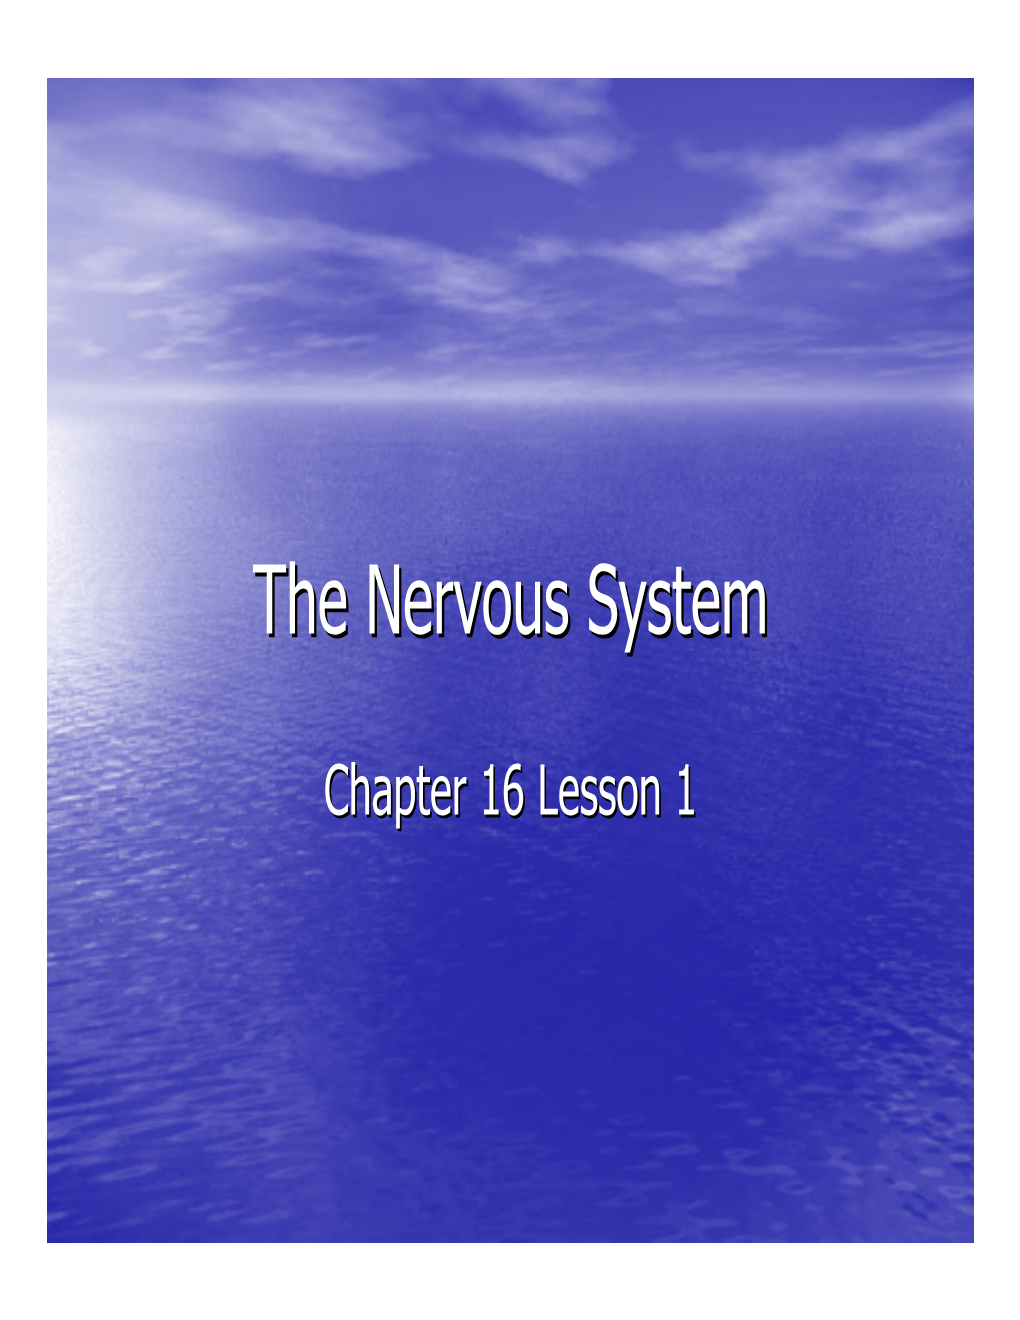 The Nervous System, the Central Nervous System (CNS), and the Peripheral Nervous System (PNS)